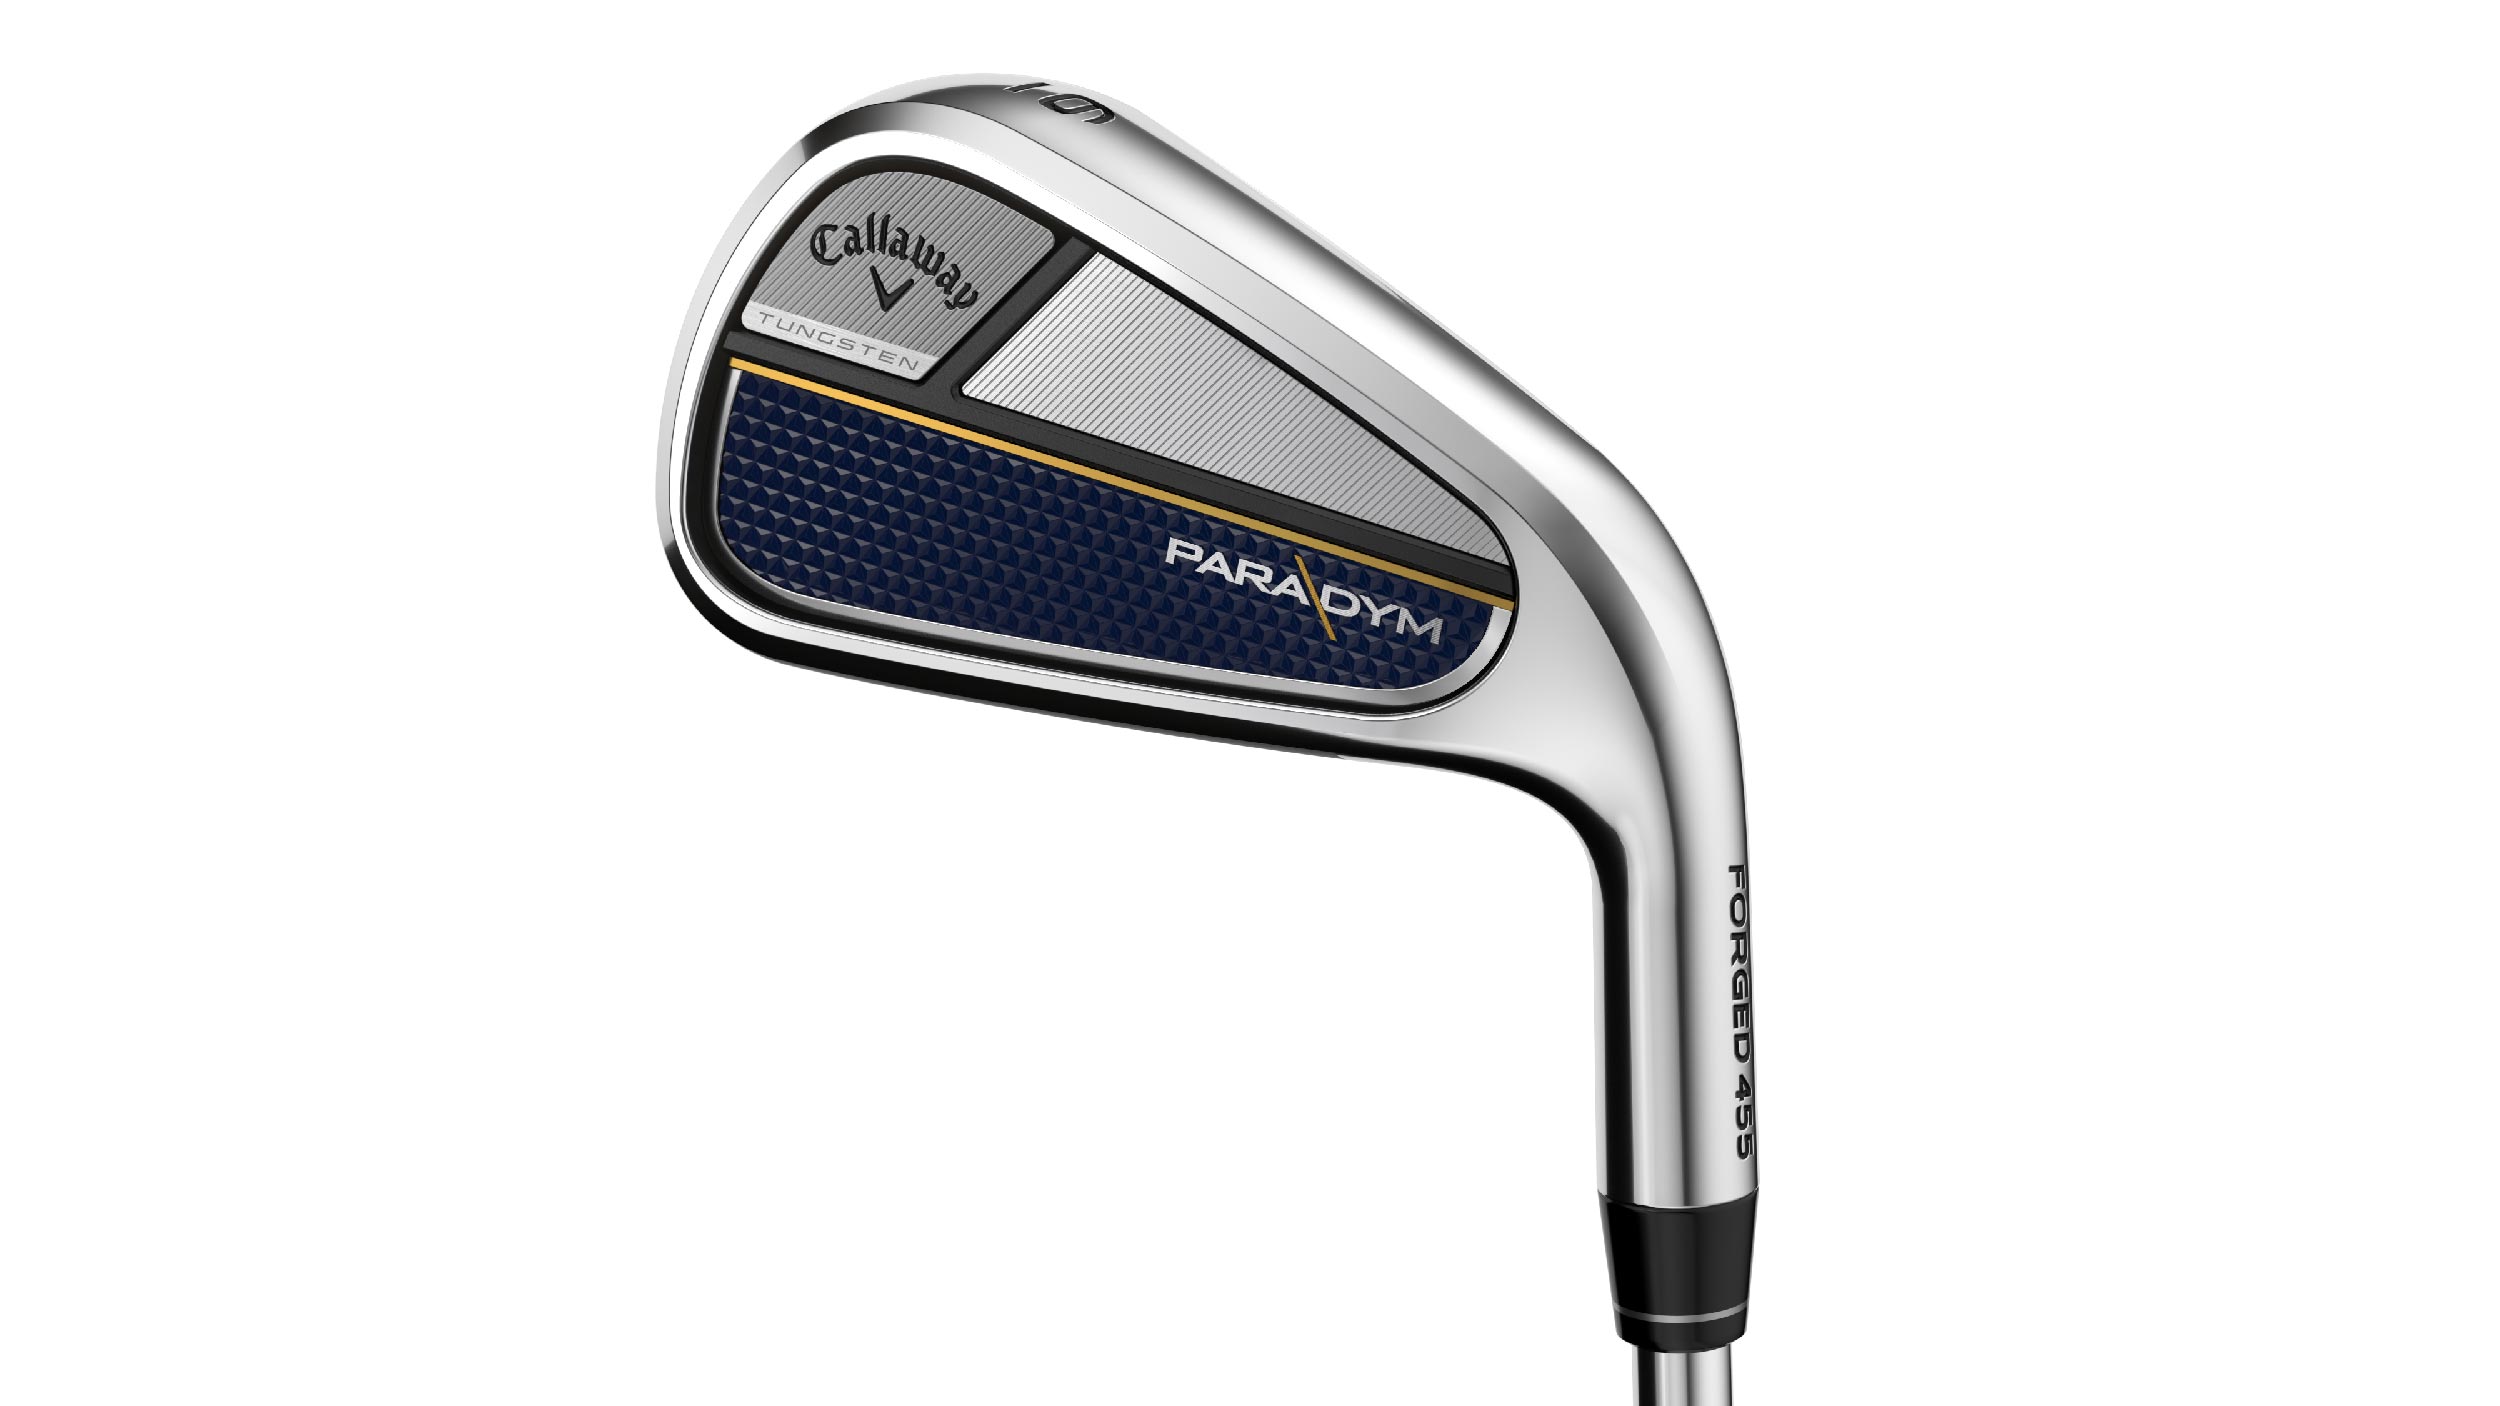 Callaway Paradym irons: Full reviews, robotic testing info and more